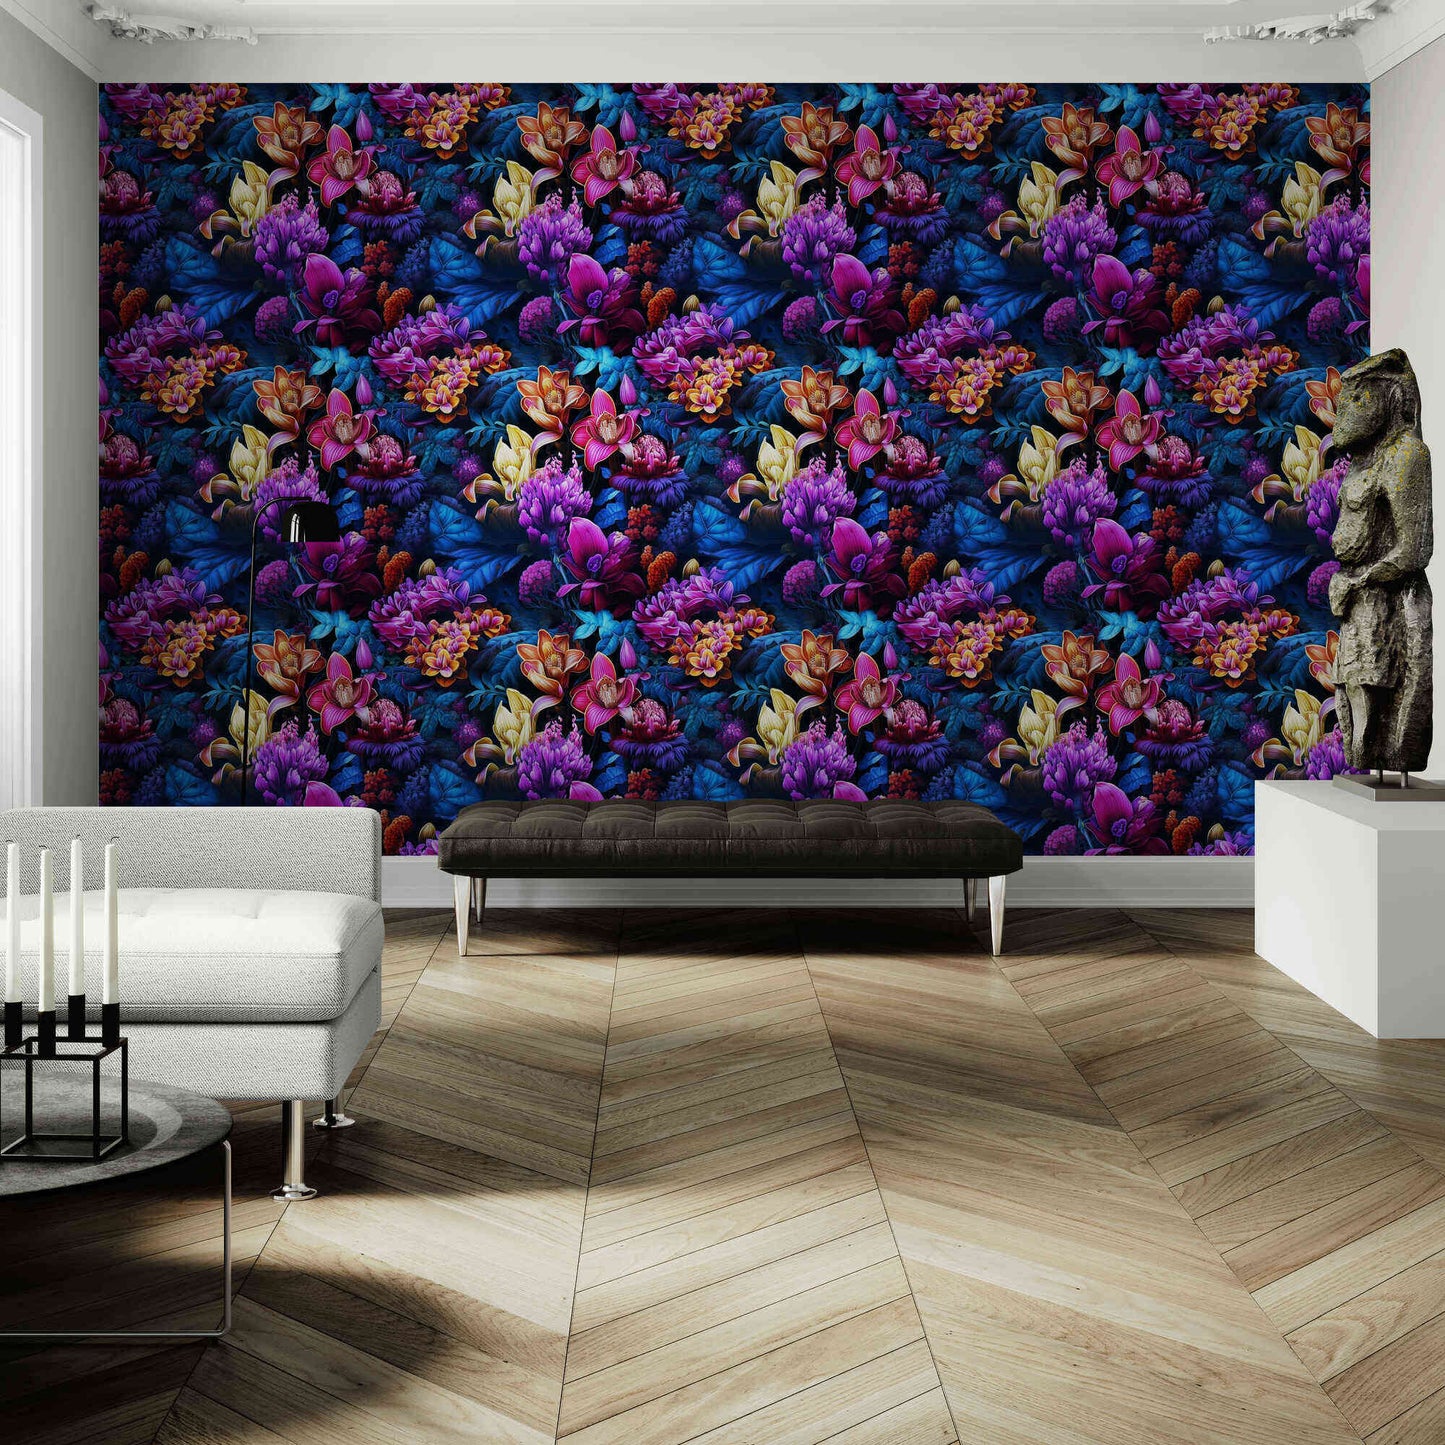 Botanic Flowers Wallpaper Wall Decor showcases a stunning display of colorful and vibrant floral designs, perfect for enhancing any room with natural beauty.